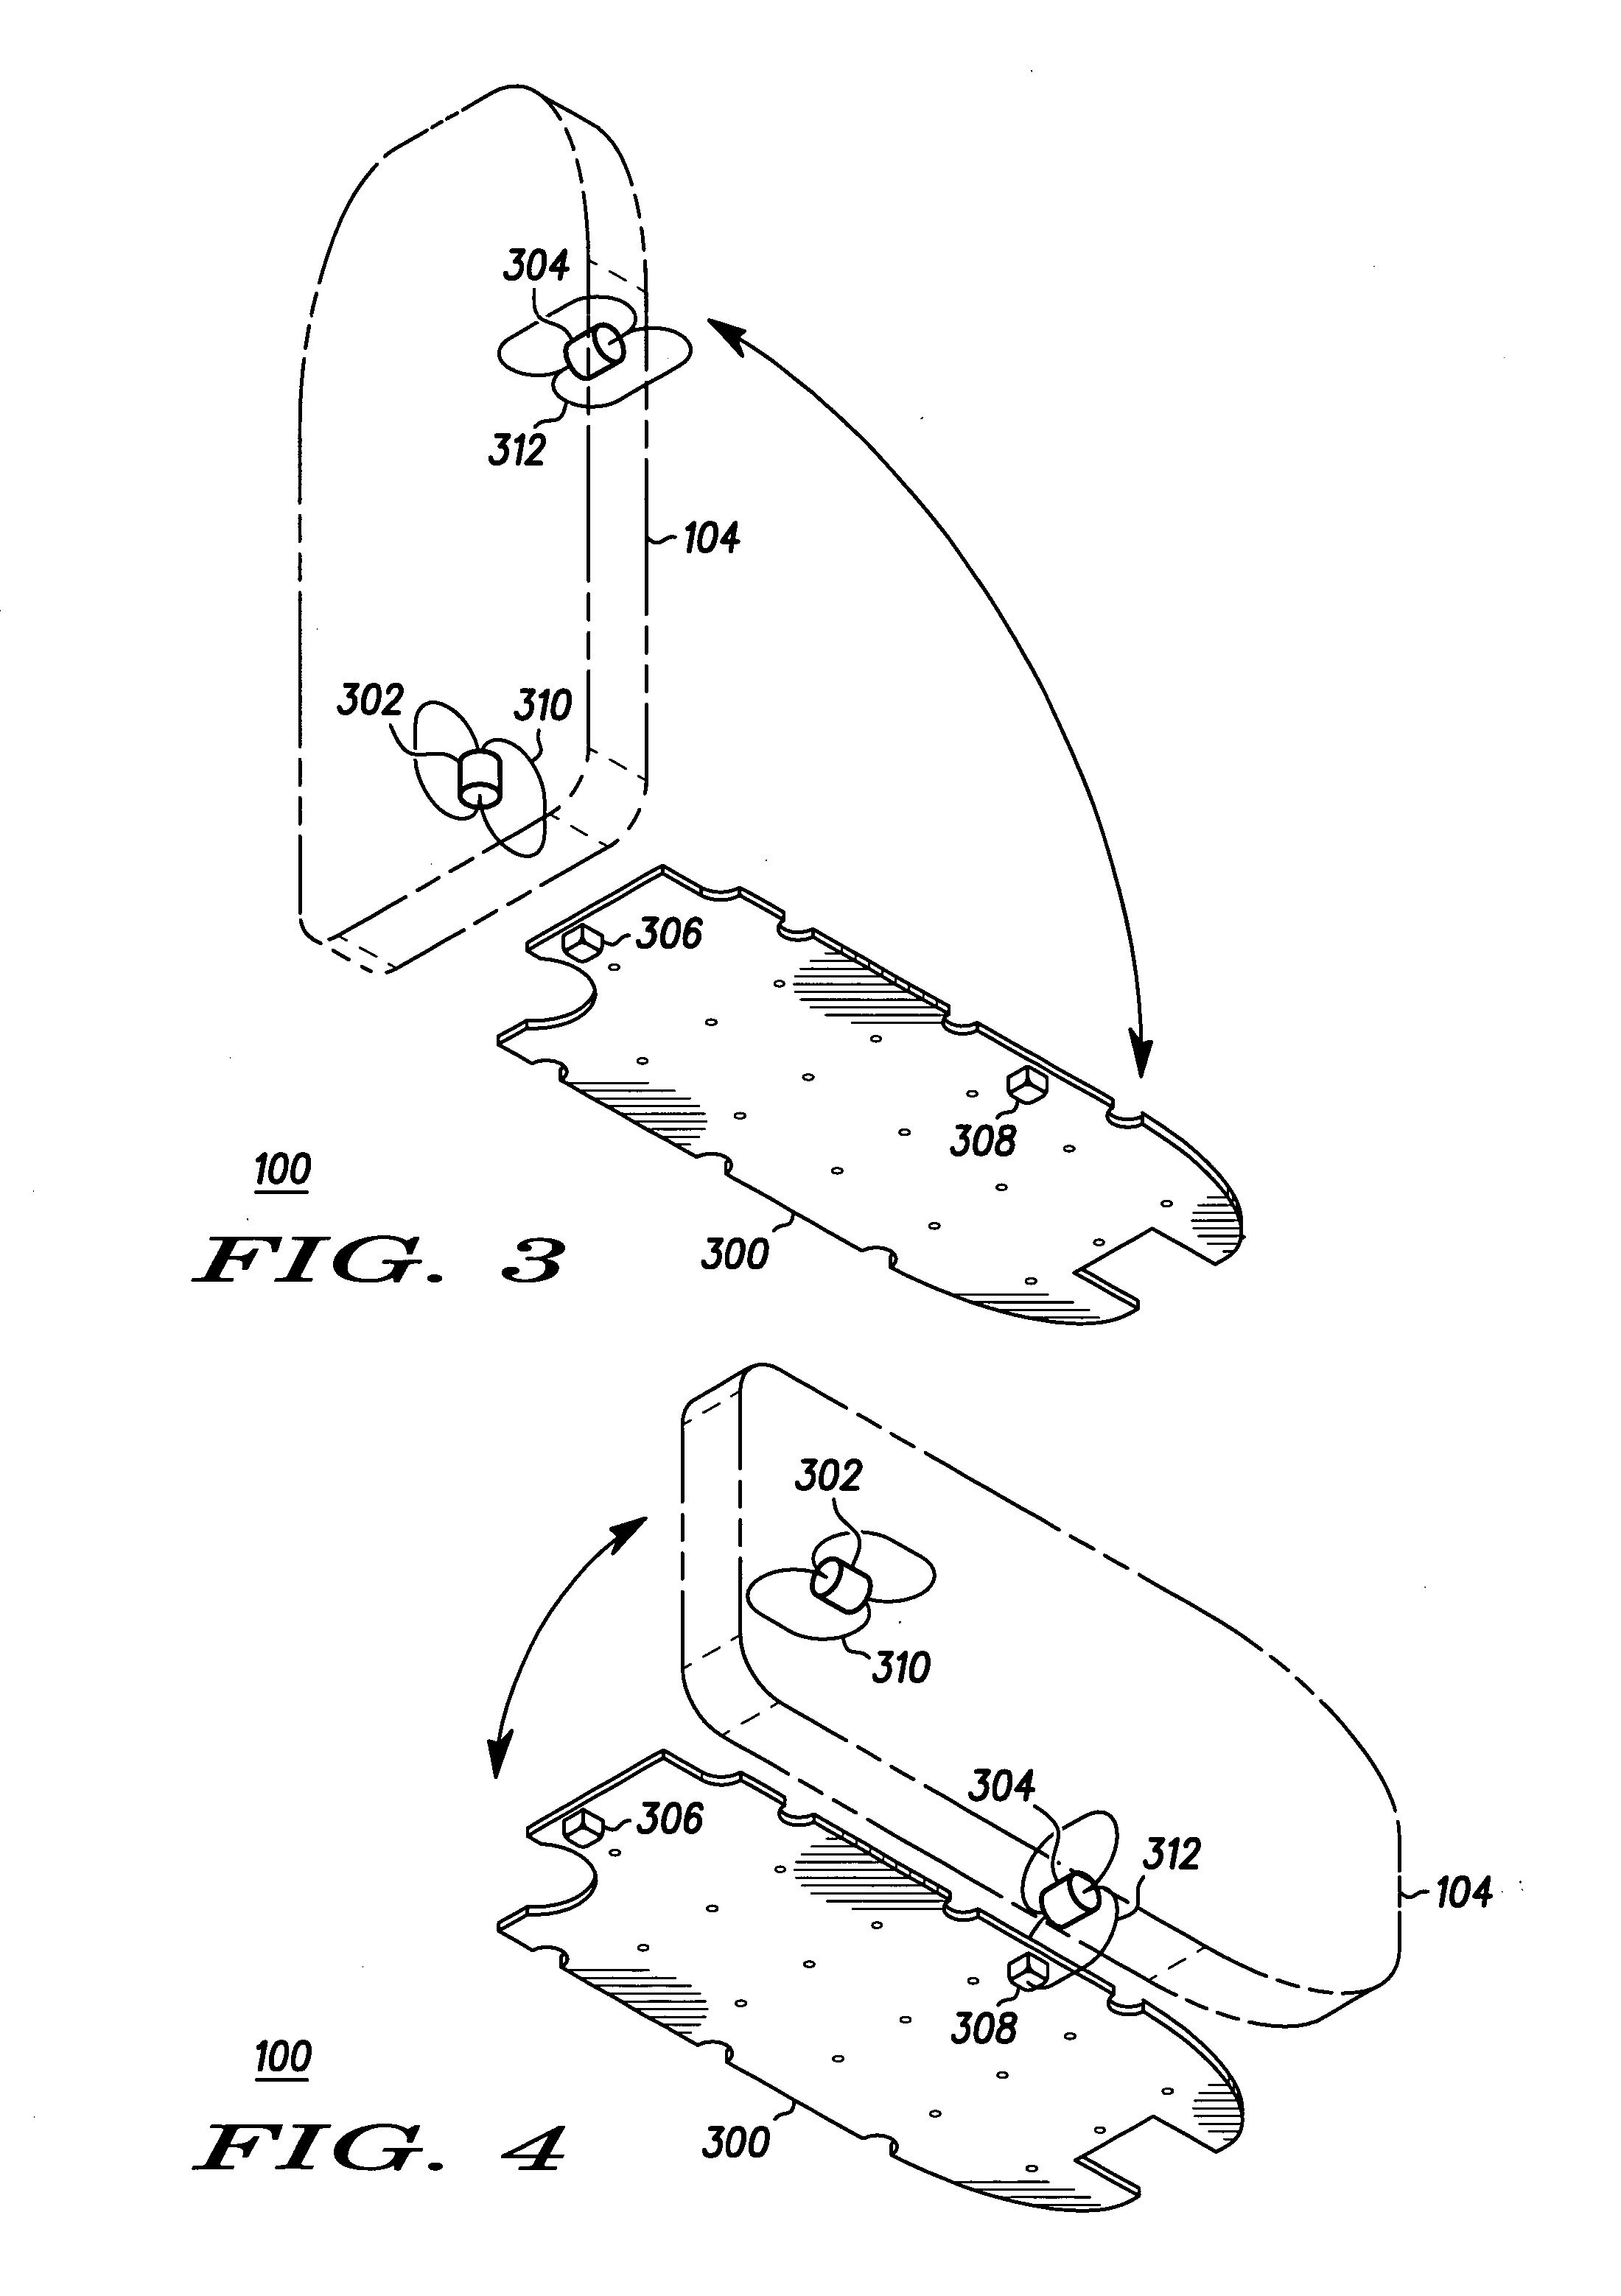 Multi-configuration portable electronic device and method for operating the same